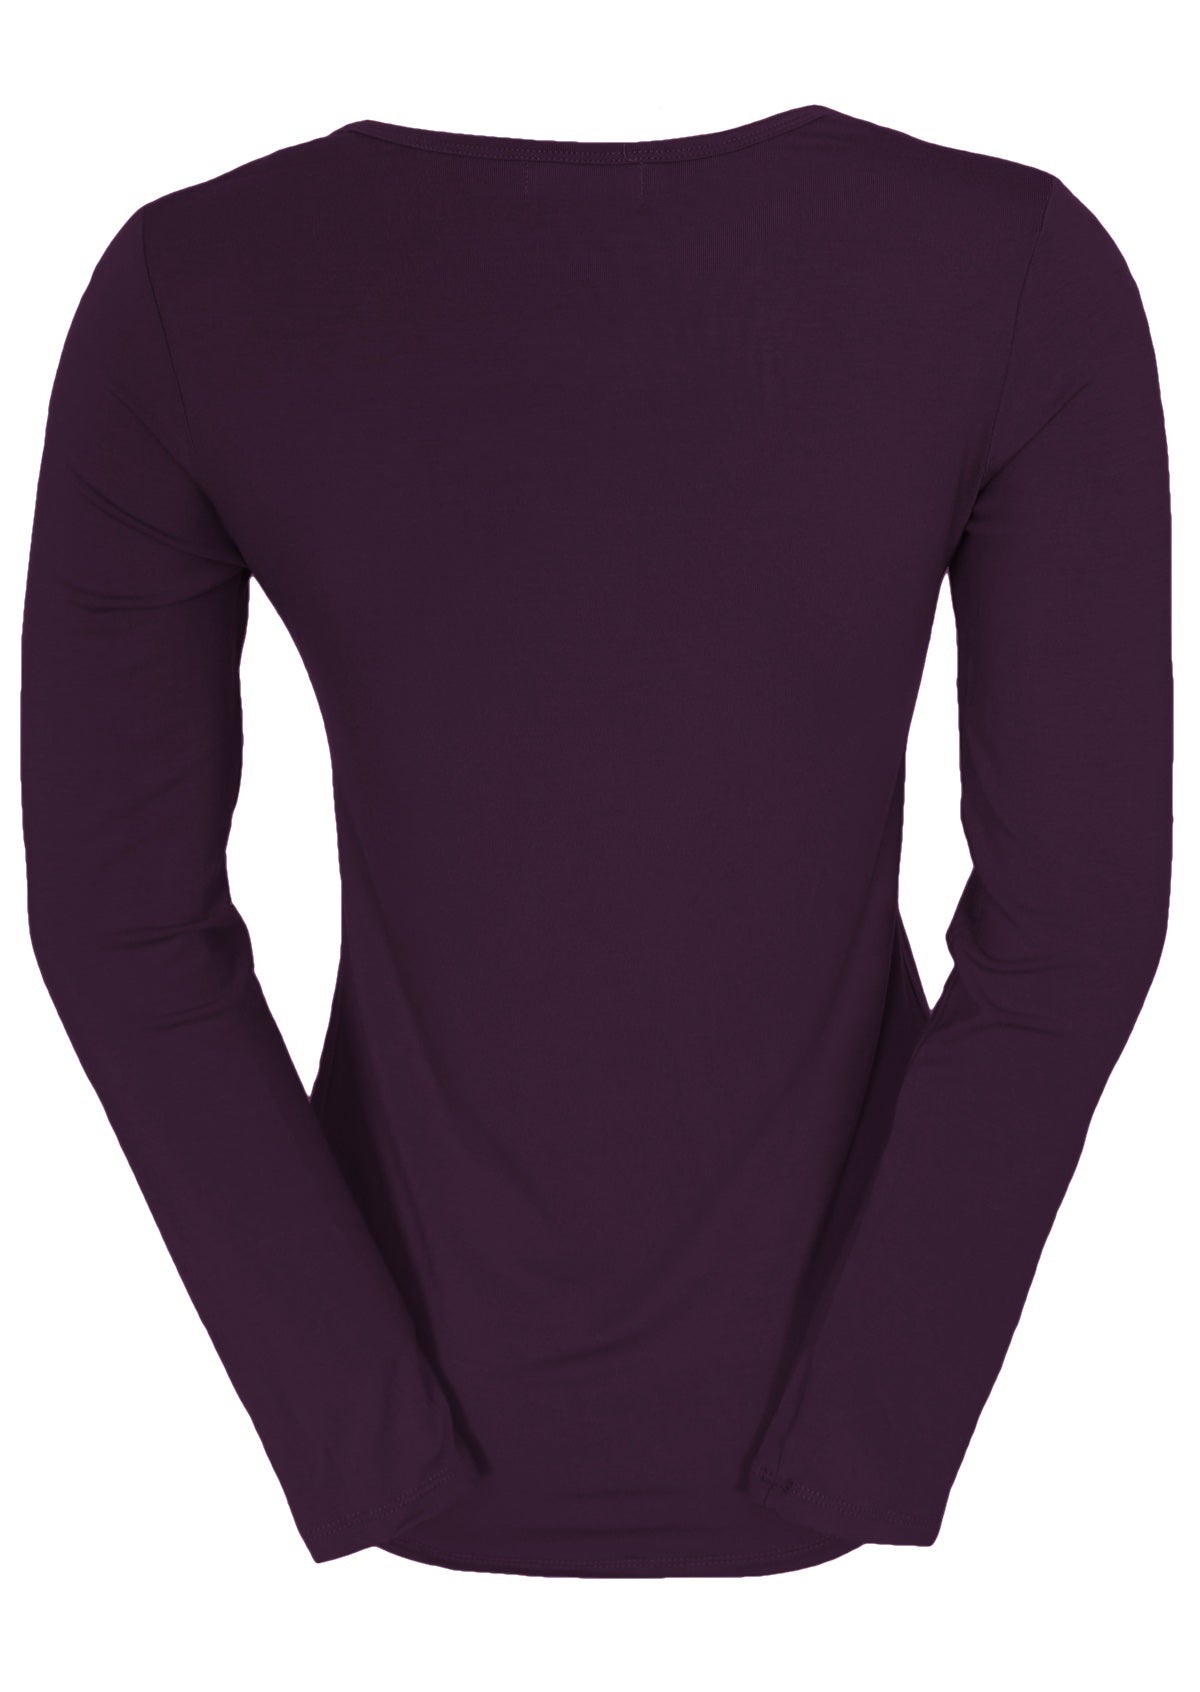 Back view of women's round neck purple long sleeve rayon top.